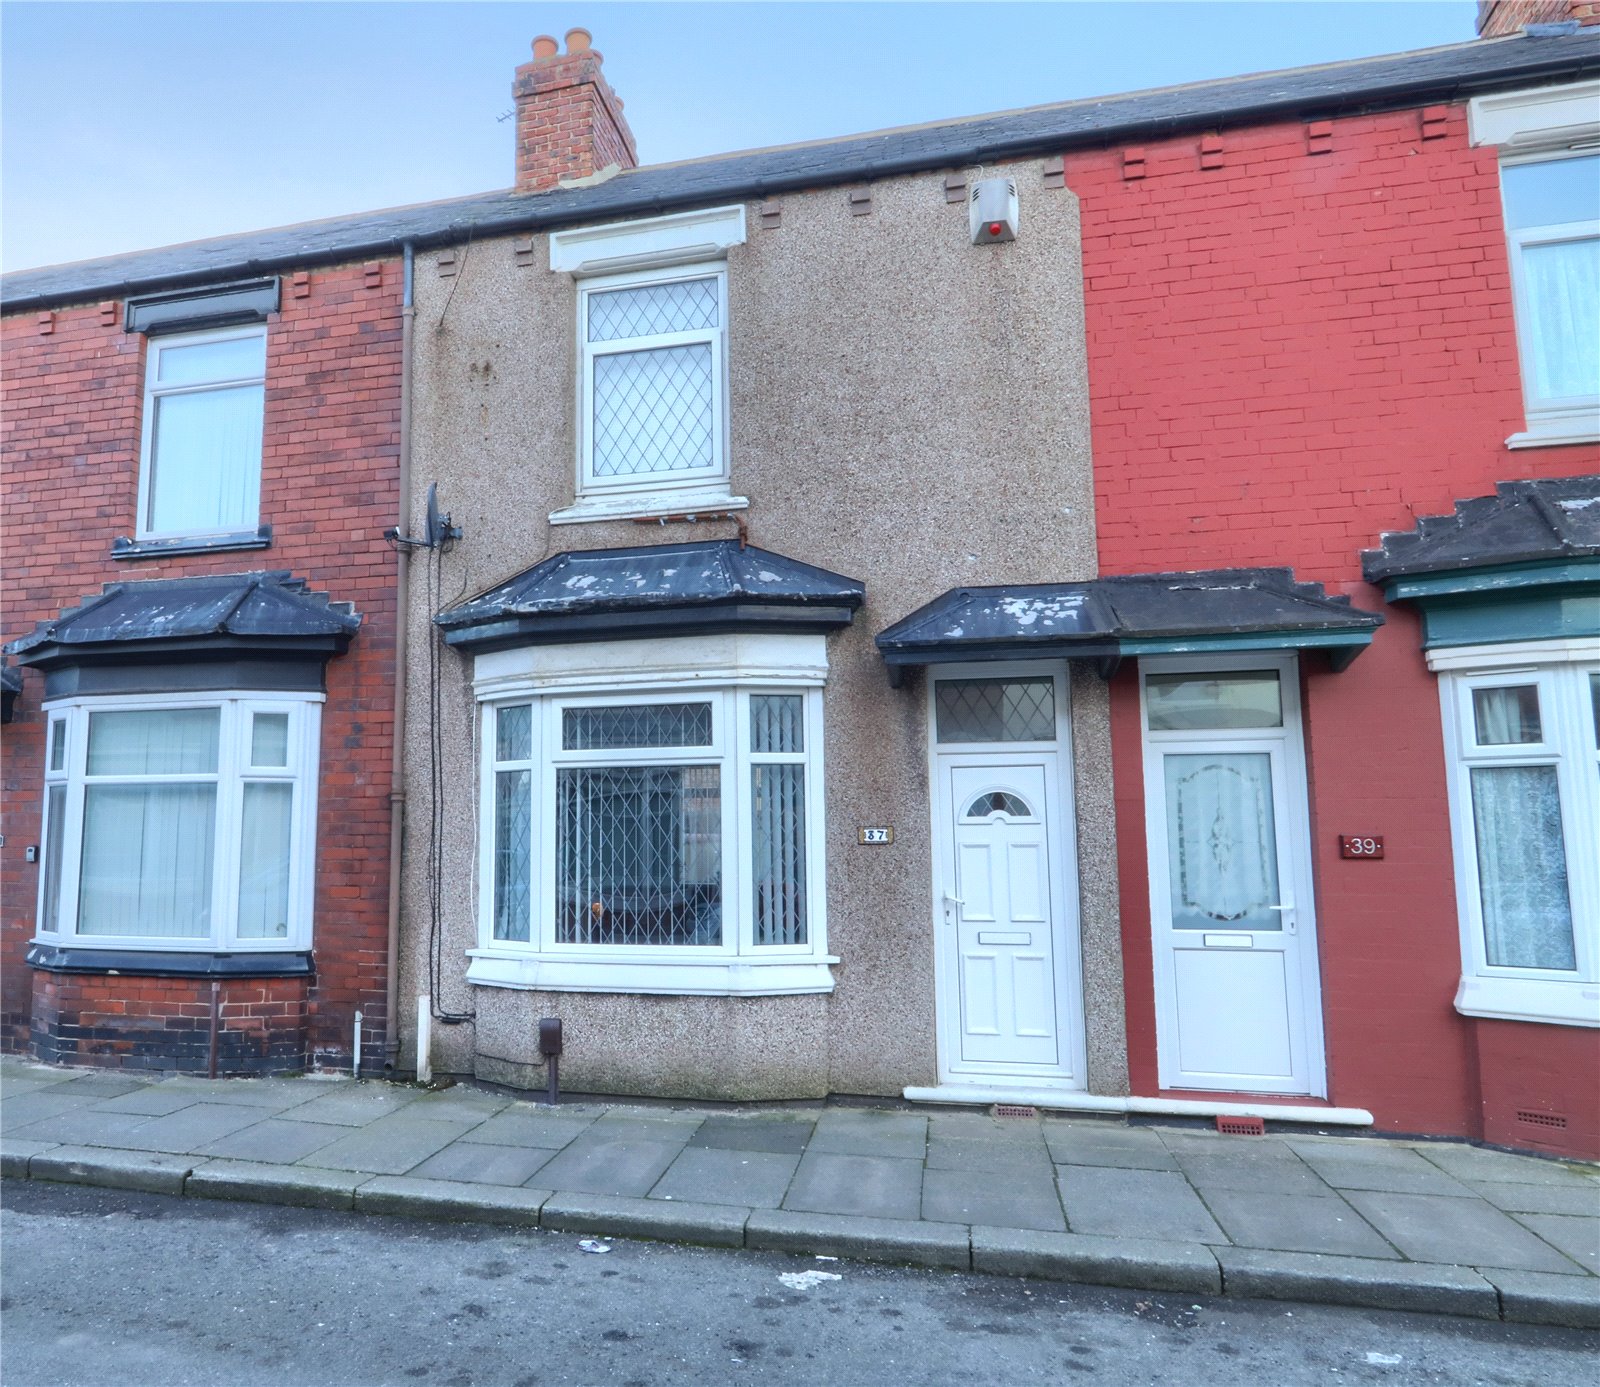 2 bed house for sale in Fitzwilliam Street, Redcar - Property Image 1